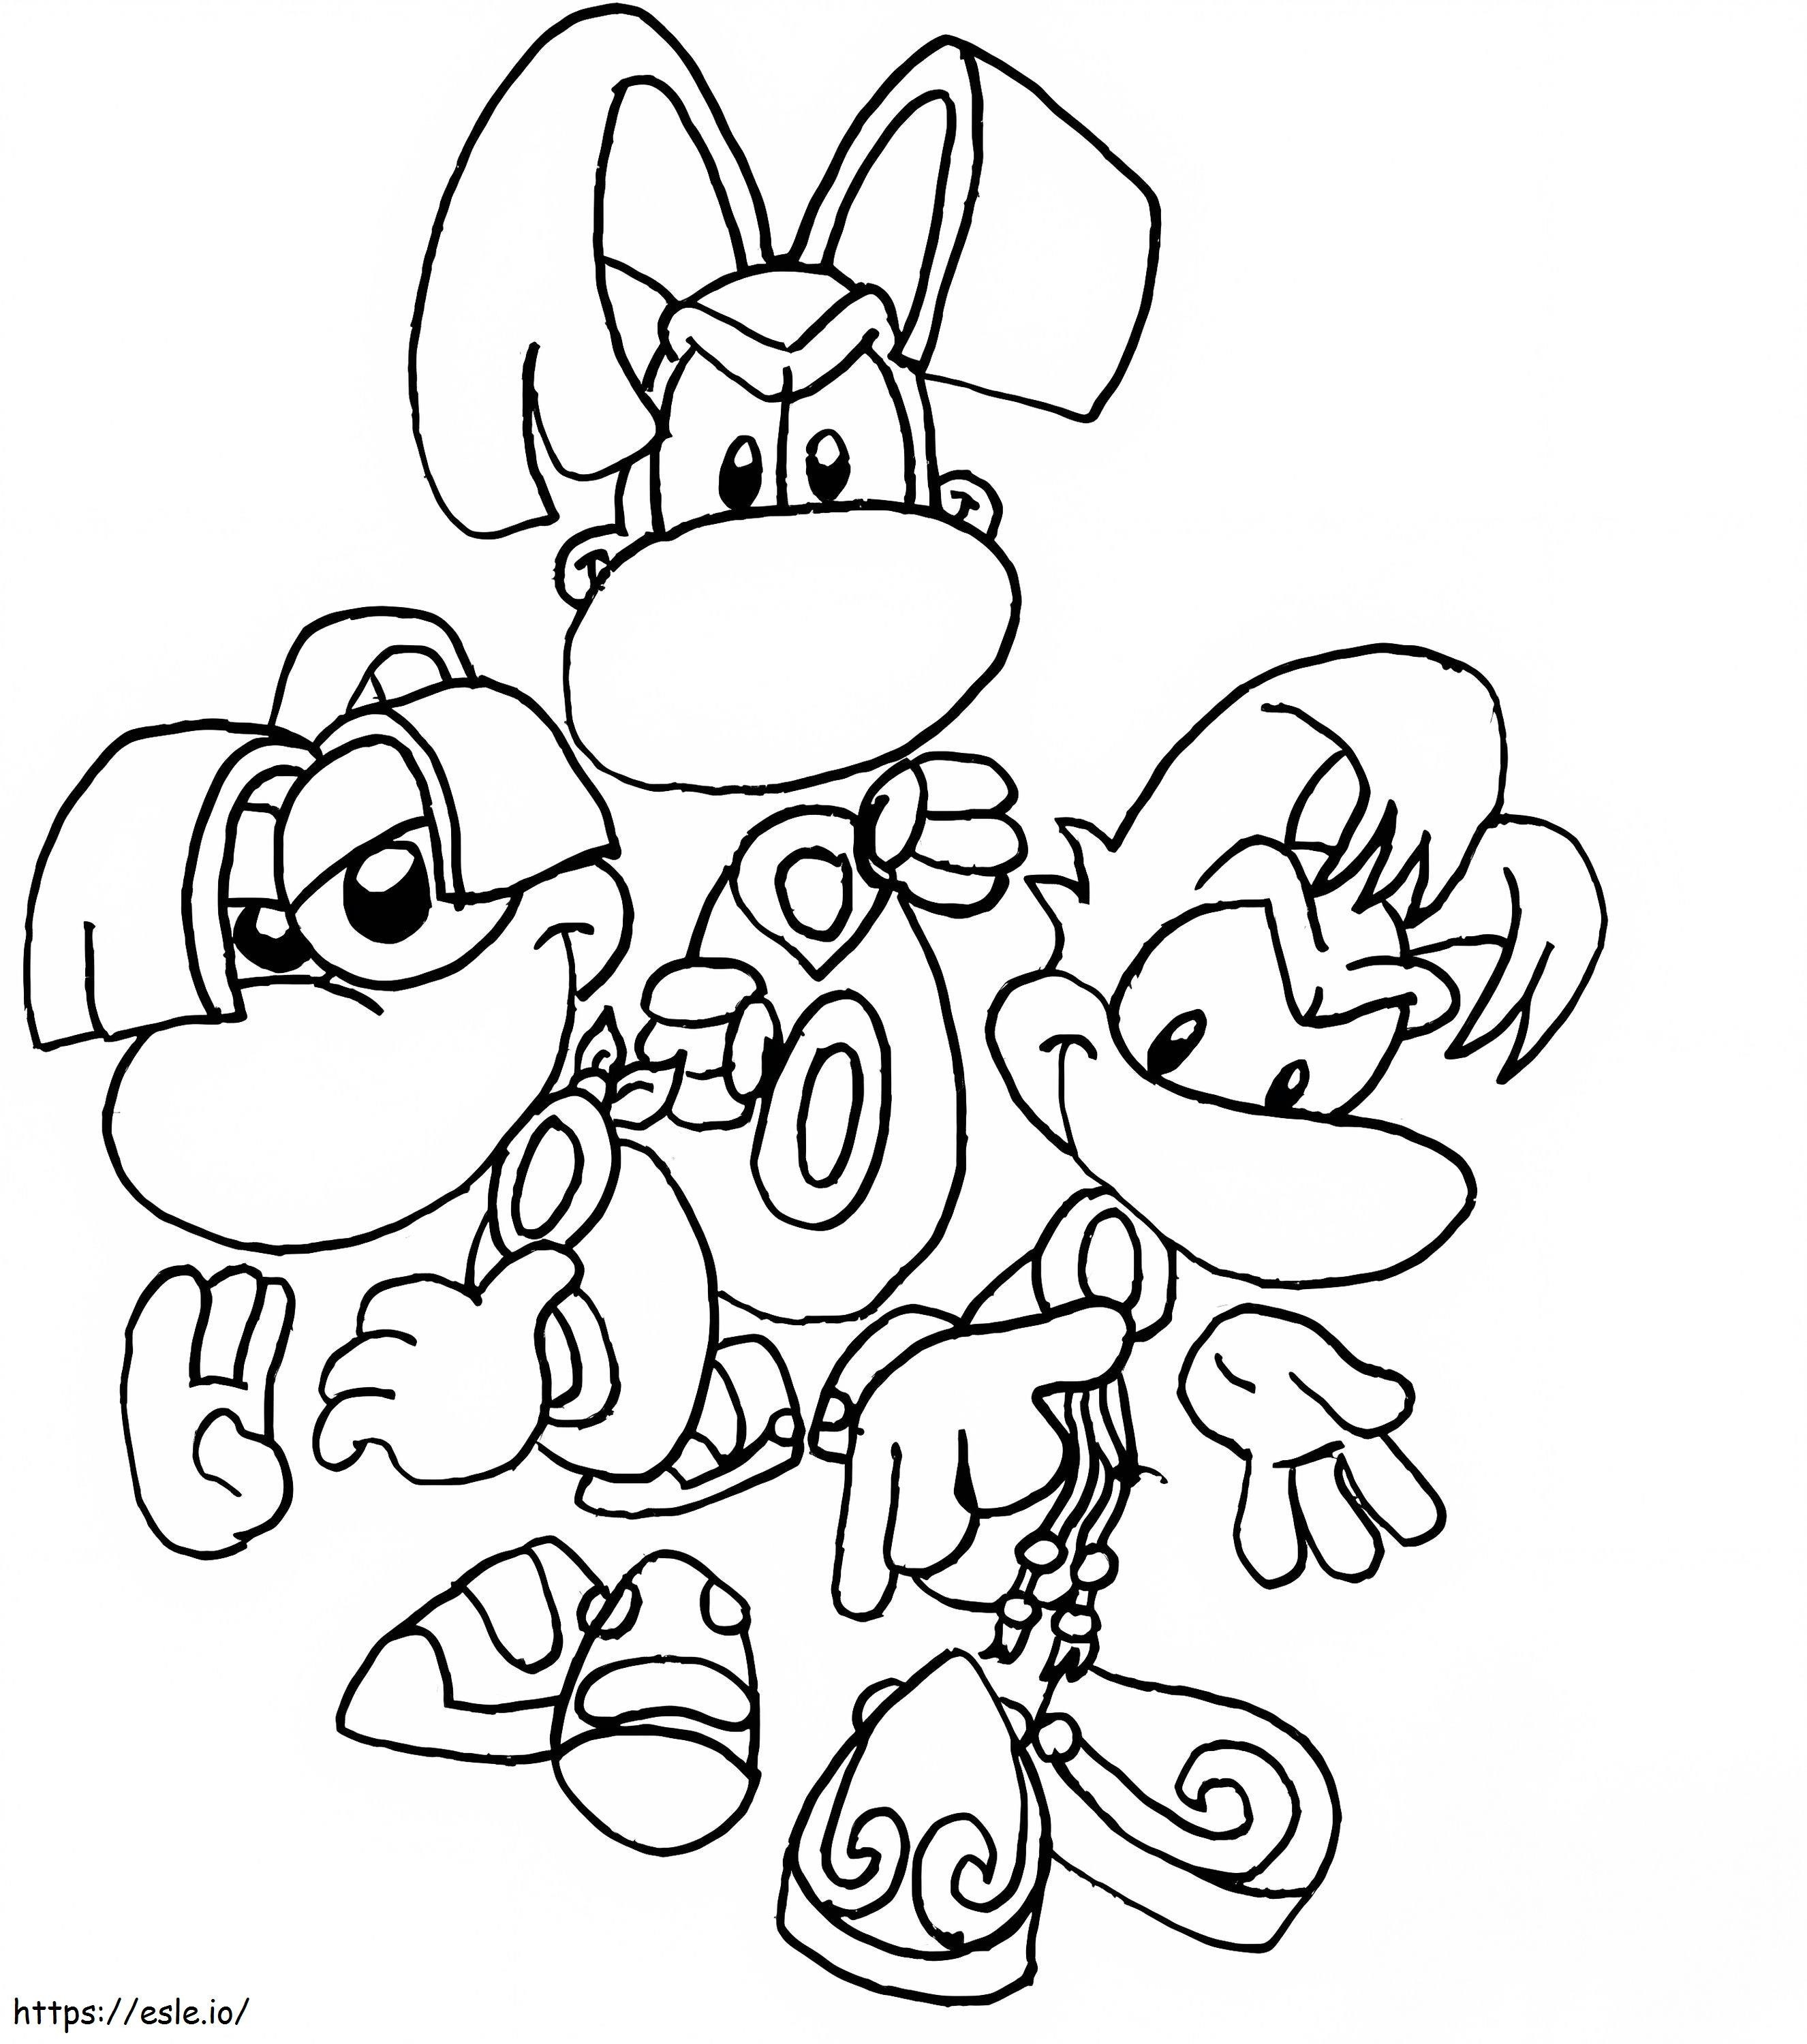 Free Rayman coloring page